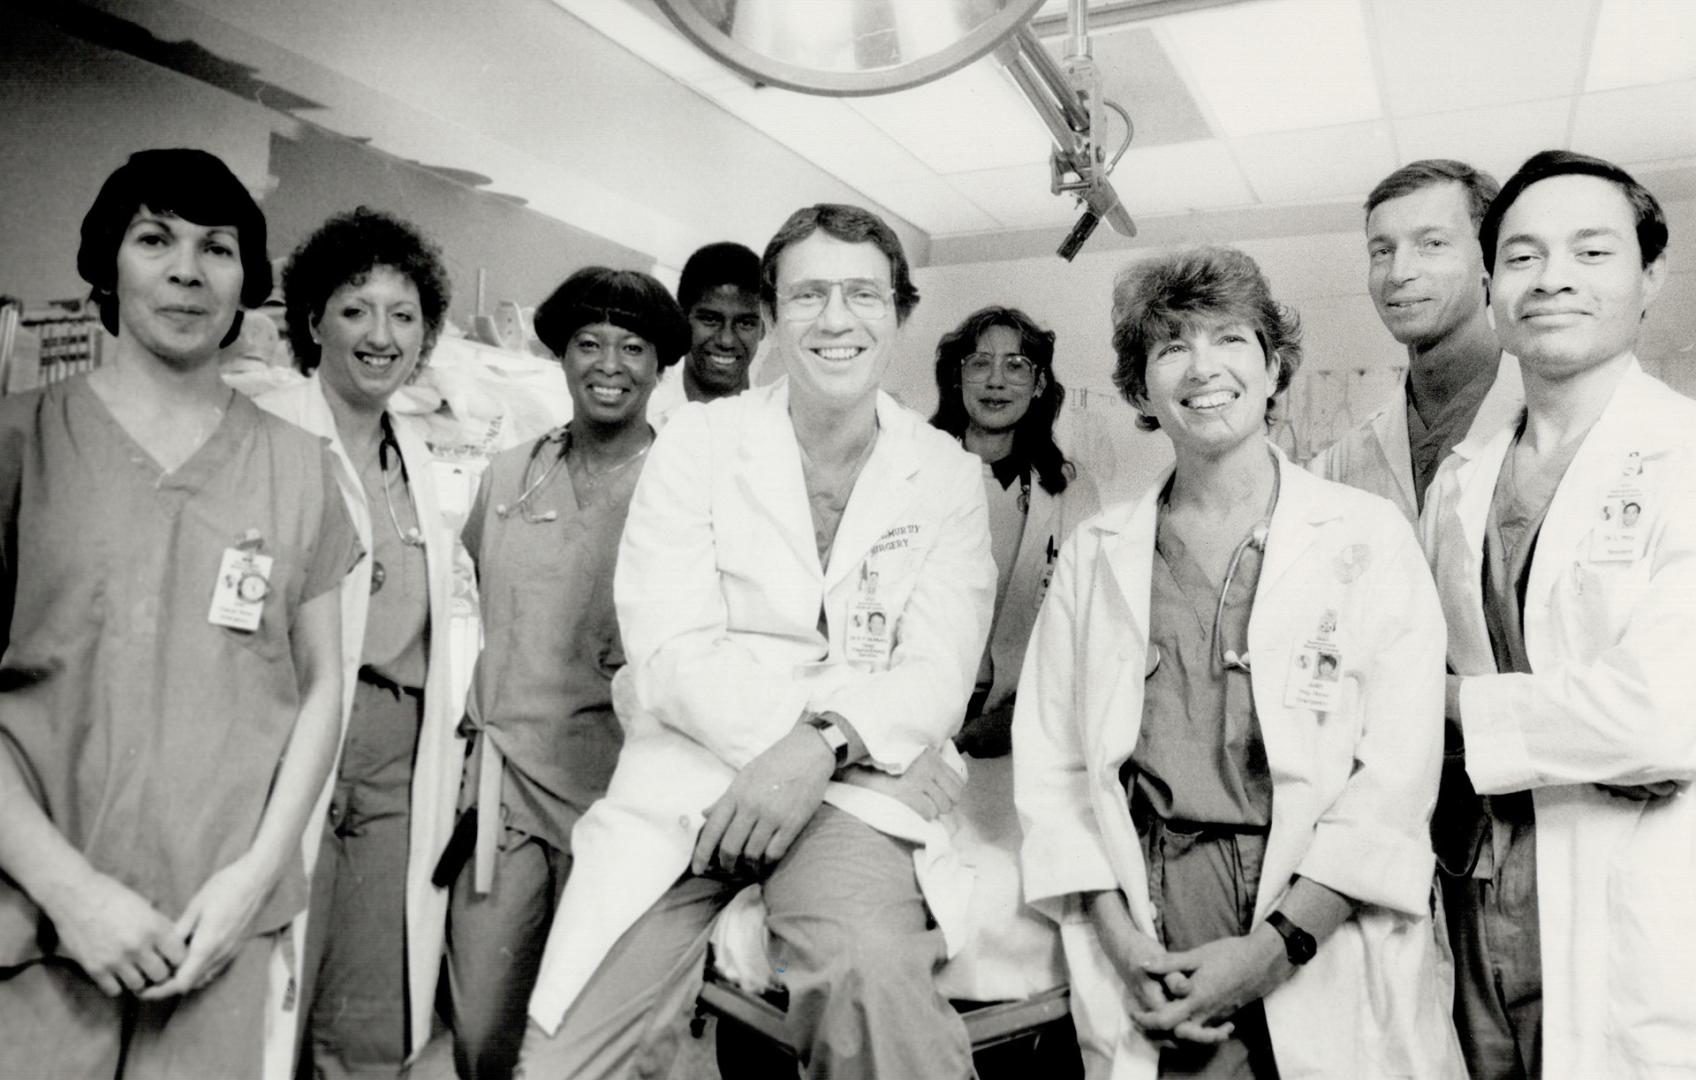 Dr. Robert McMurty, head of the trauma unit he co-founded, is flanked by some of his team